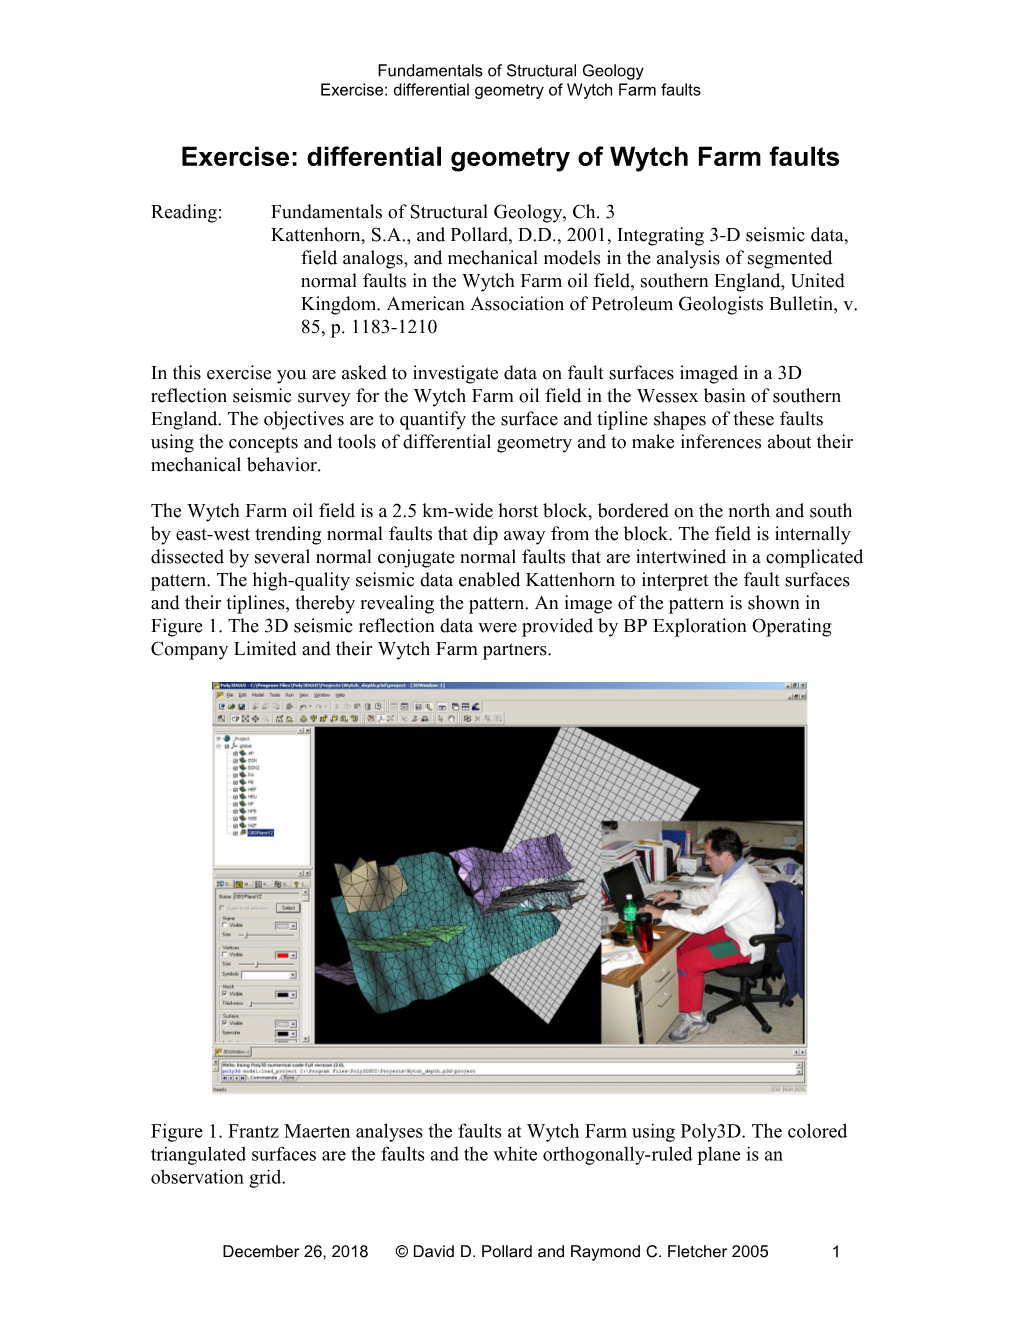 Exercise: Differential Geometry of Wytch Farm Faults